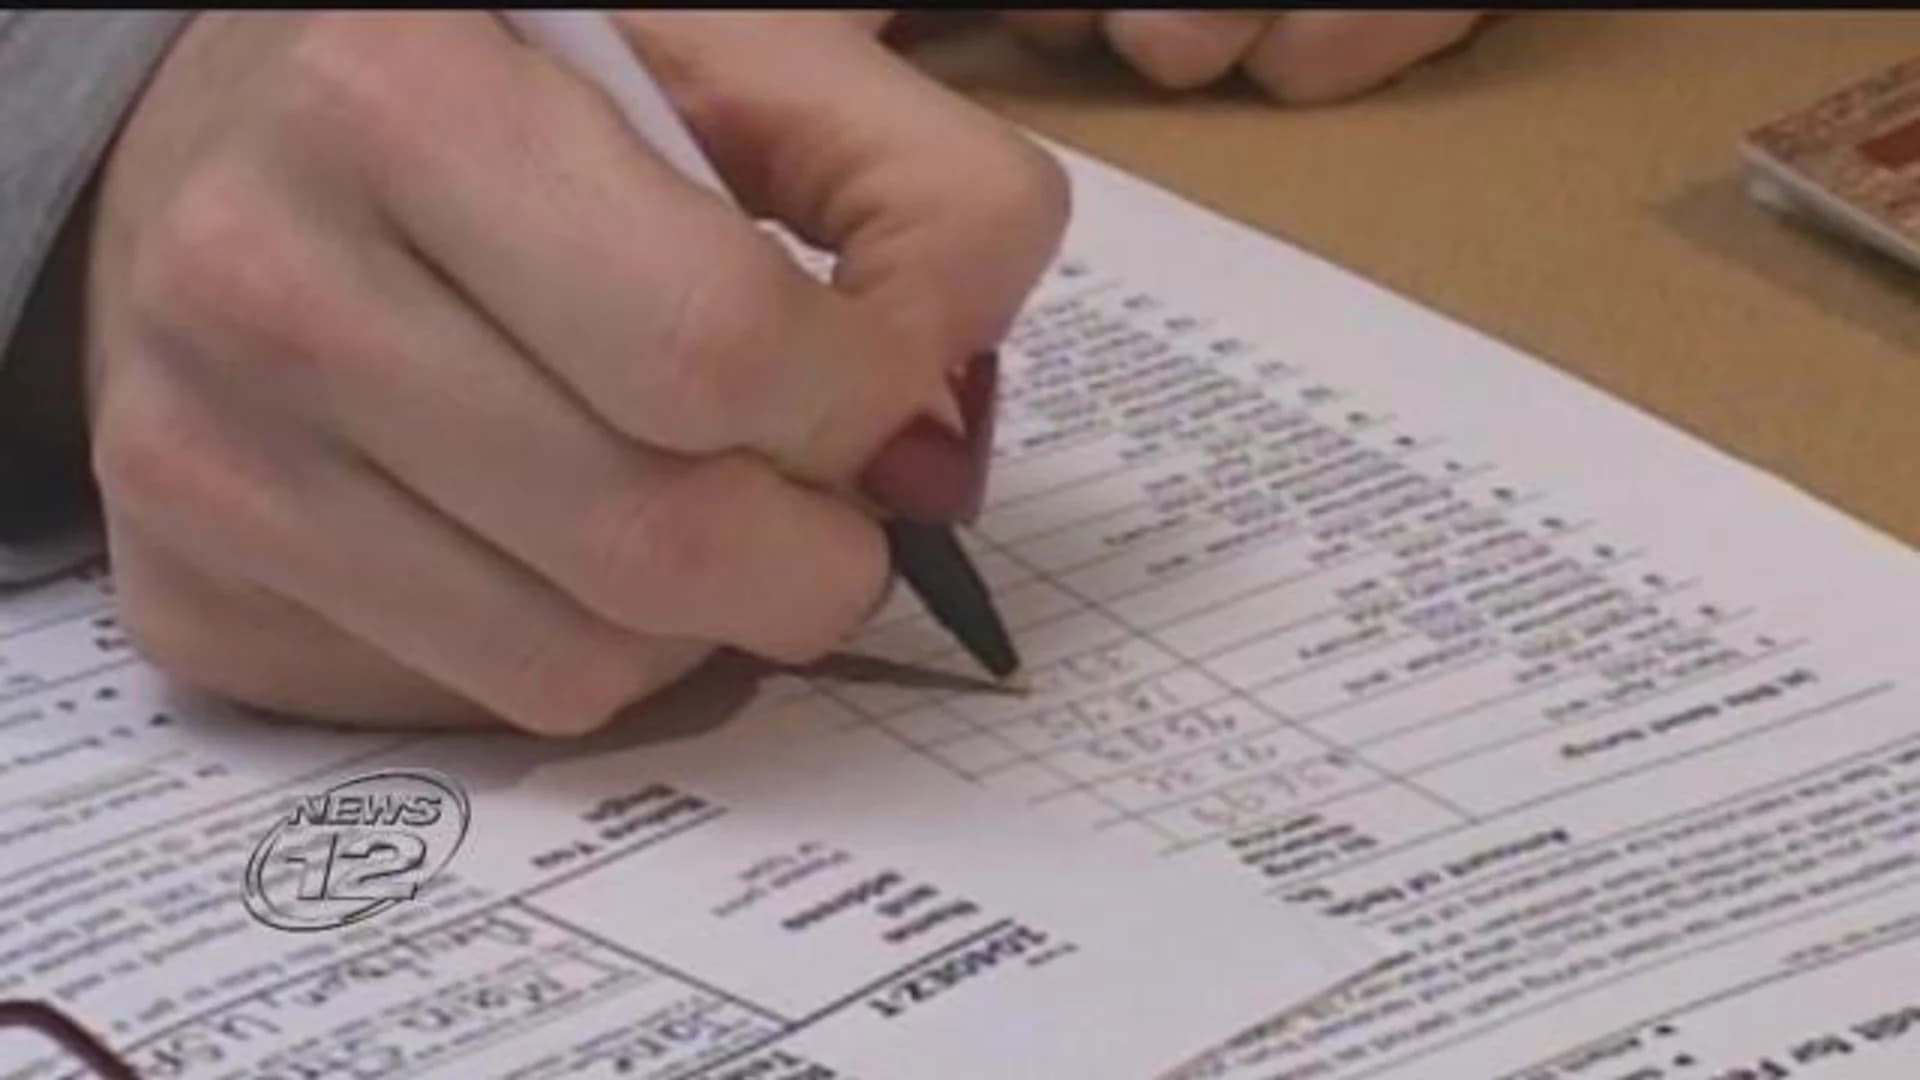 Taxpayers get 1-day extension due to IRS glitch